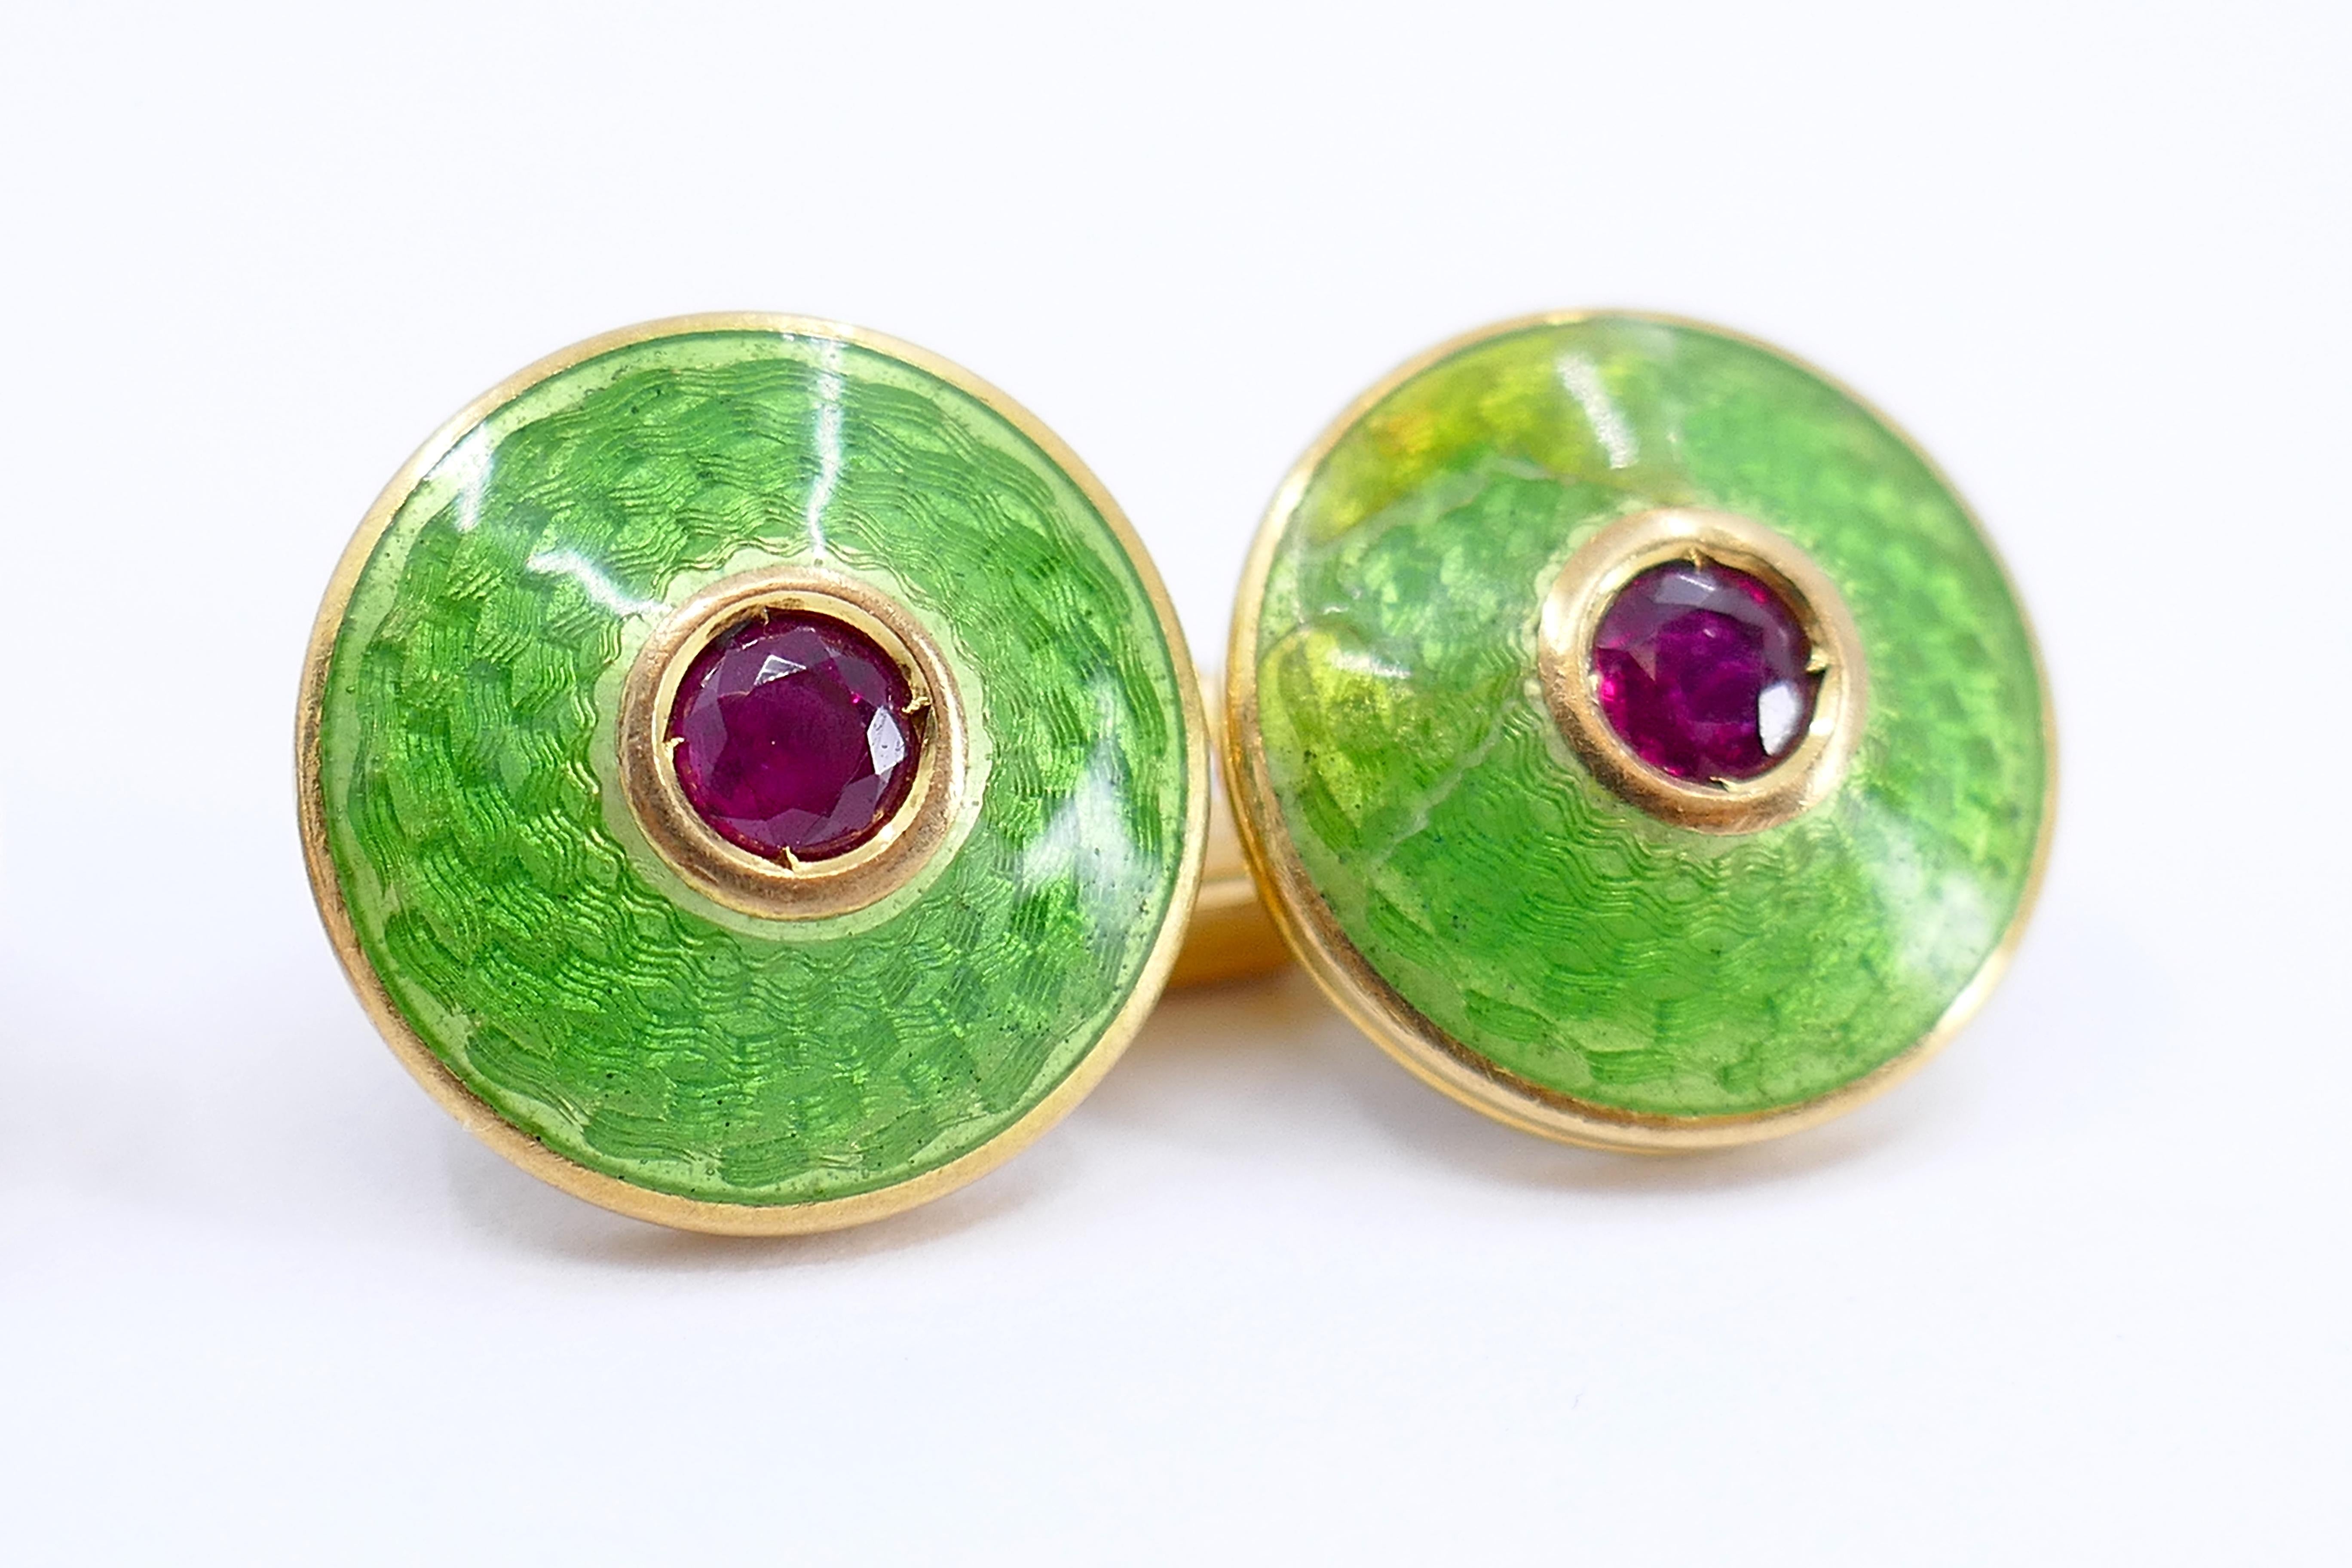 These French cufflinks, crafted in the 1930s, showcase a vibrant and sophisticated design. Made with 18K gold, the cufflinks feature a bright green guilloche enamel pattern that adds a touch of elegance. Each link is adorned with rubies, totaling